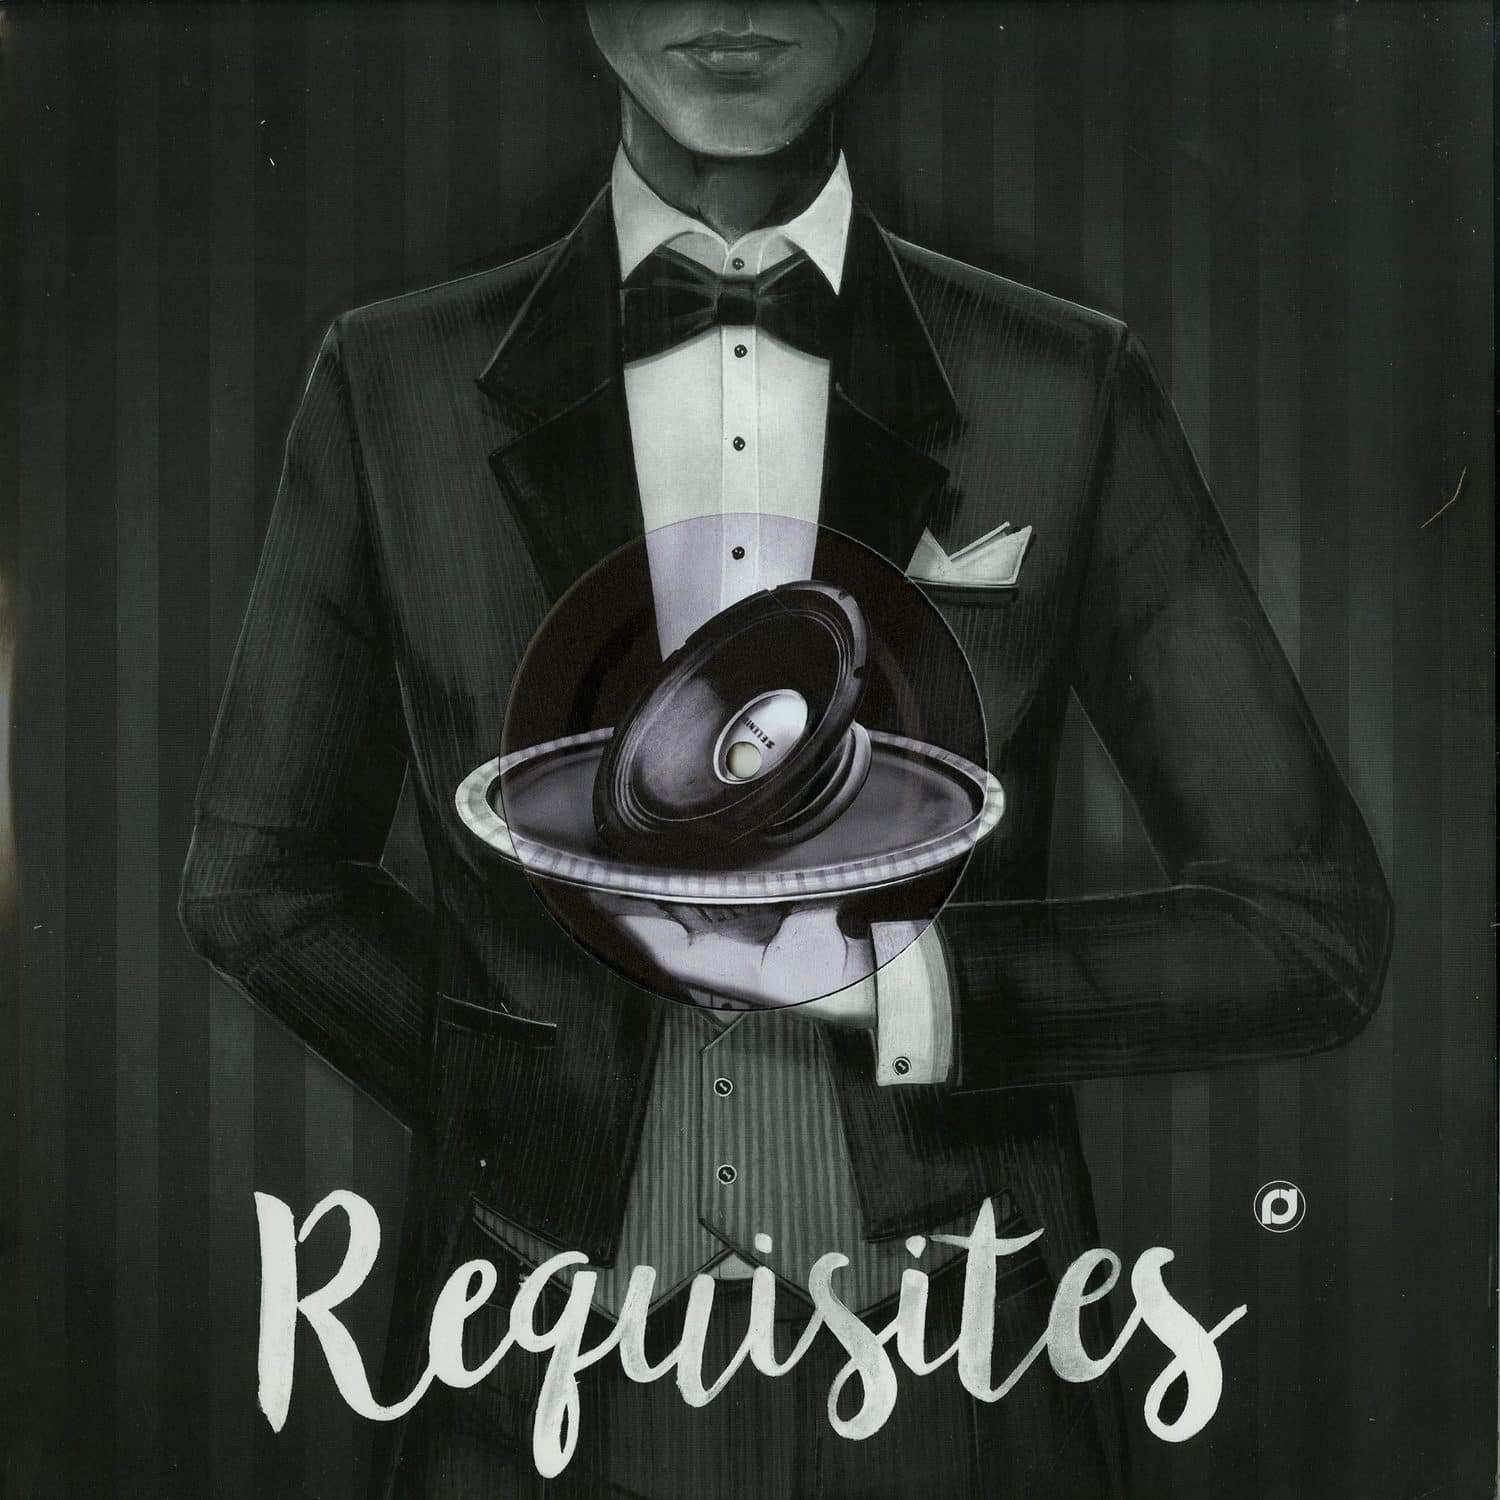 Andy Pain / Robustus / Eastcolors / Stash - REQUISITES 2 